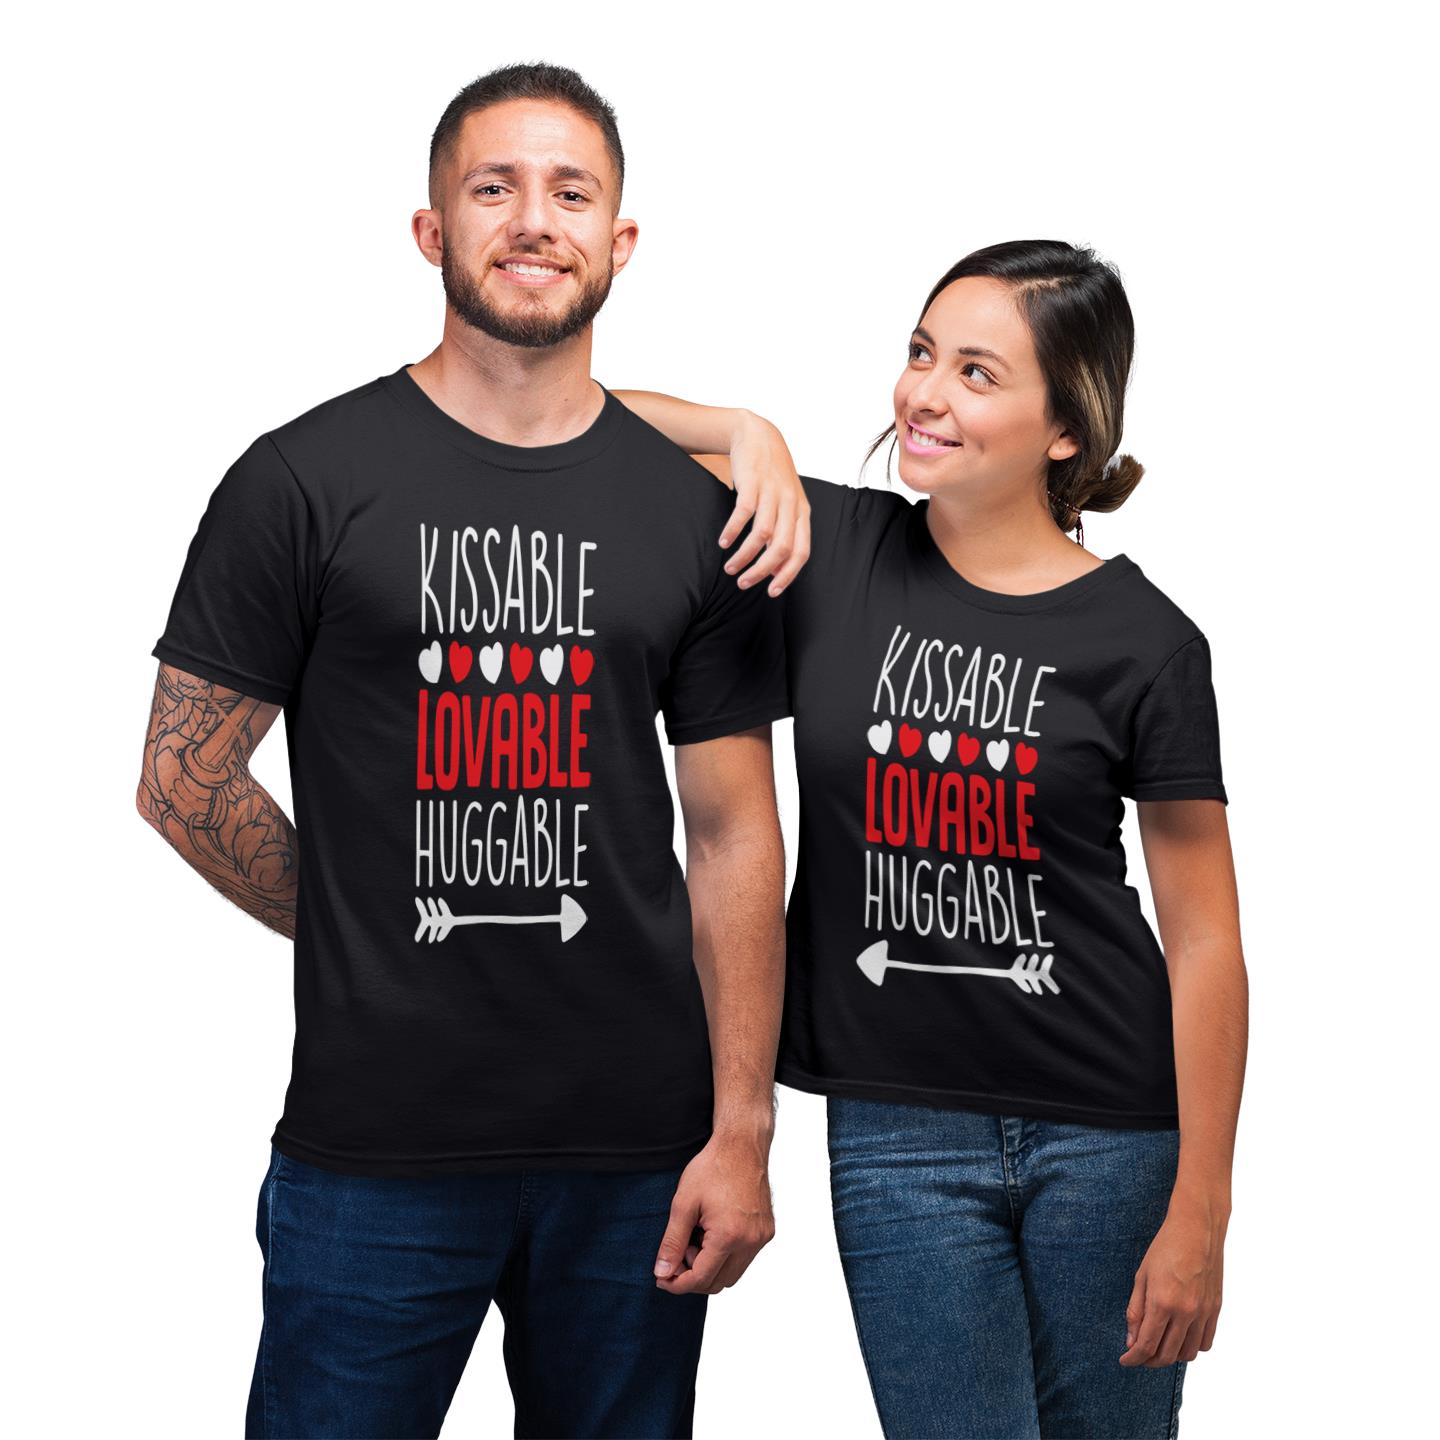 Kissable Loveable Huggable Him And Her Shirt For Couple Lover Matching T-shirt